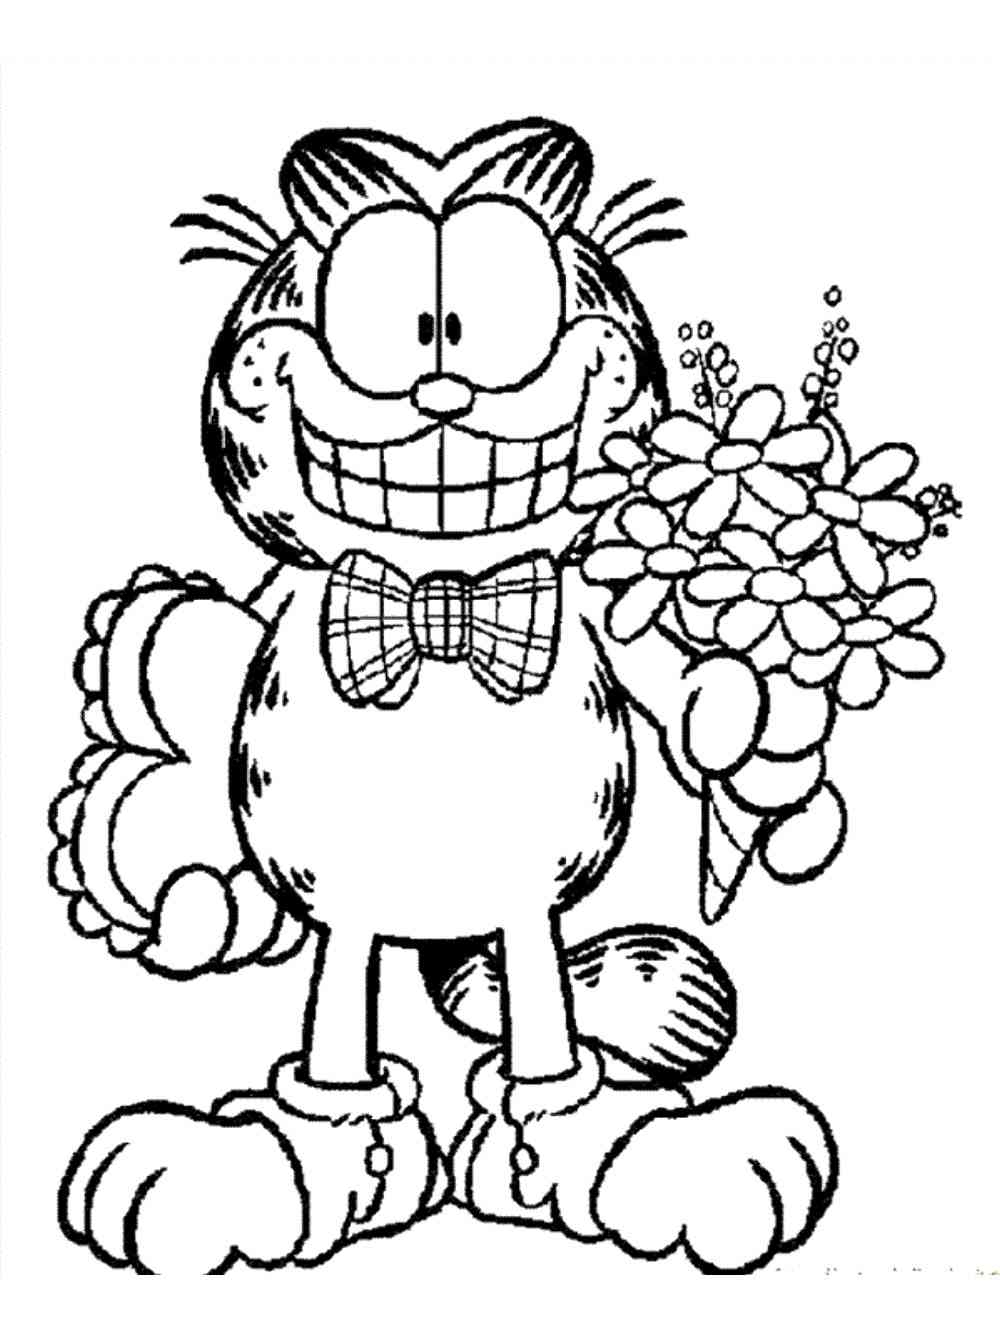 Garfield 4 coloring page